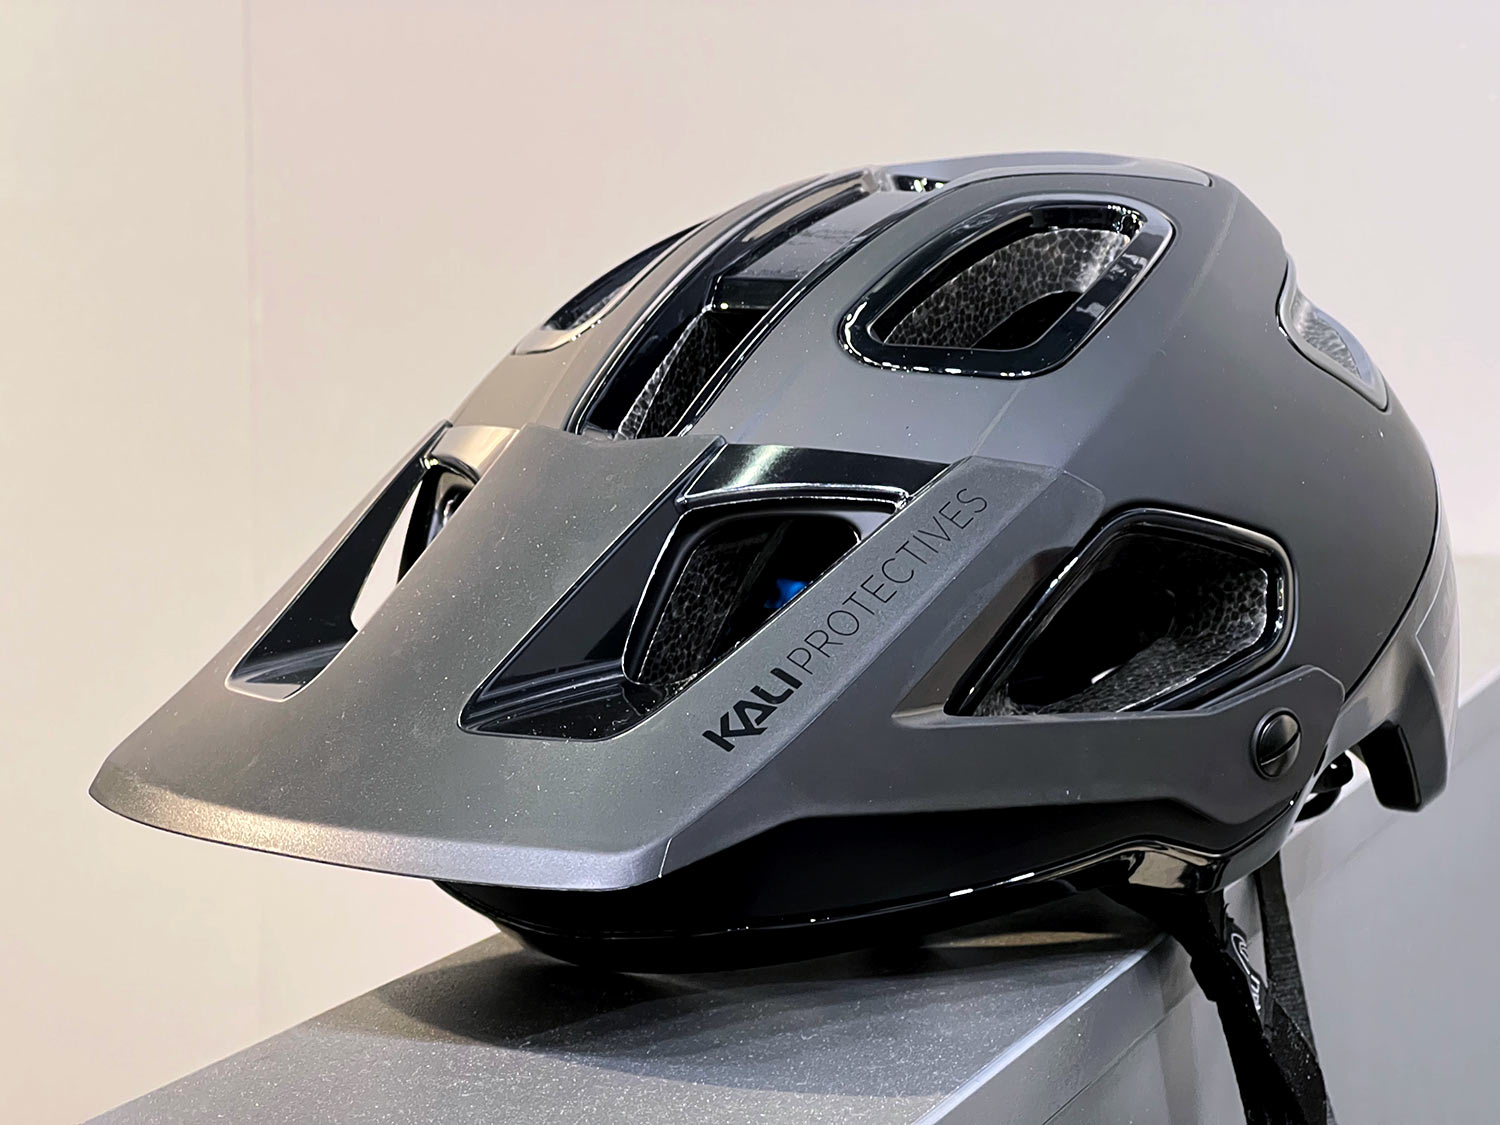 kali cascade trail mtb helmet with eco-friendly materials shown from front angle